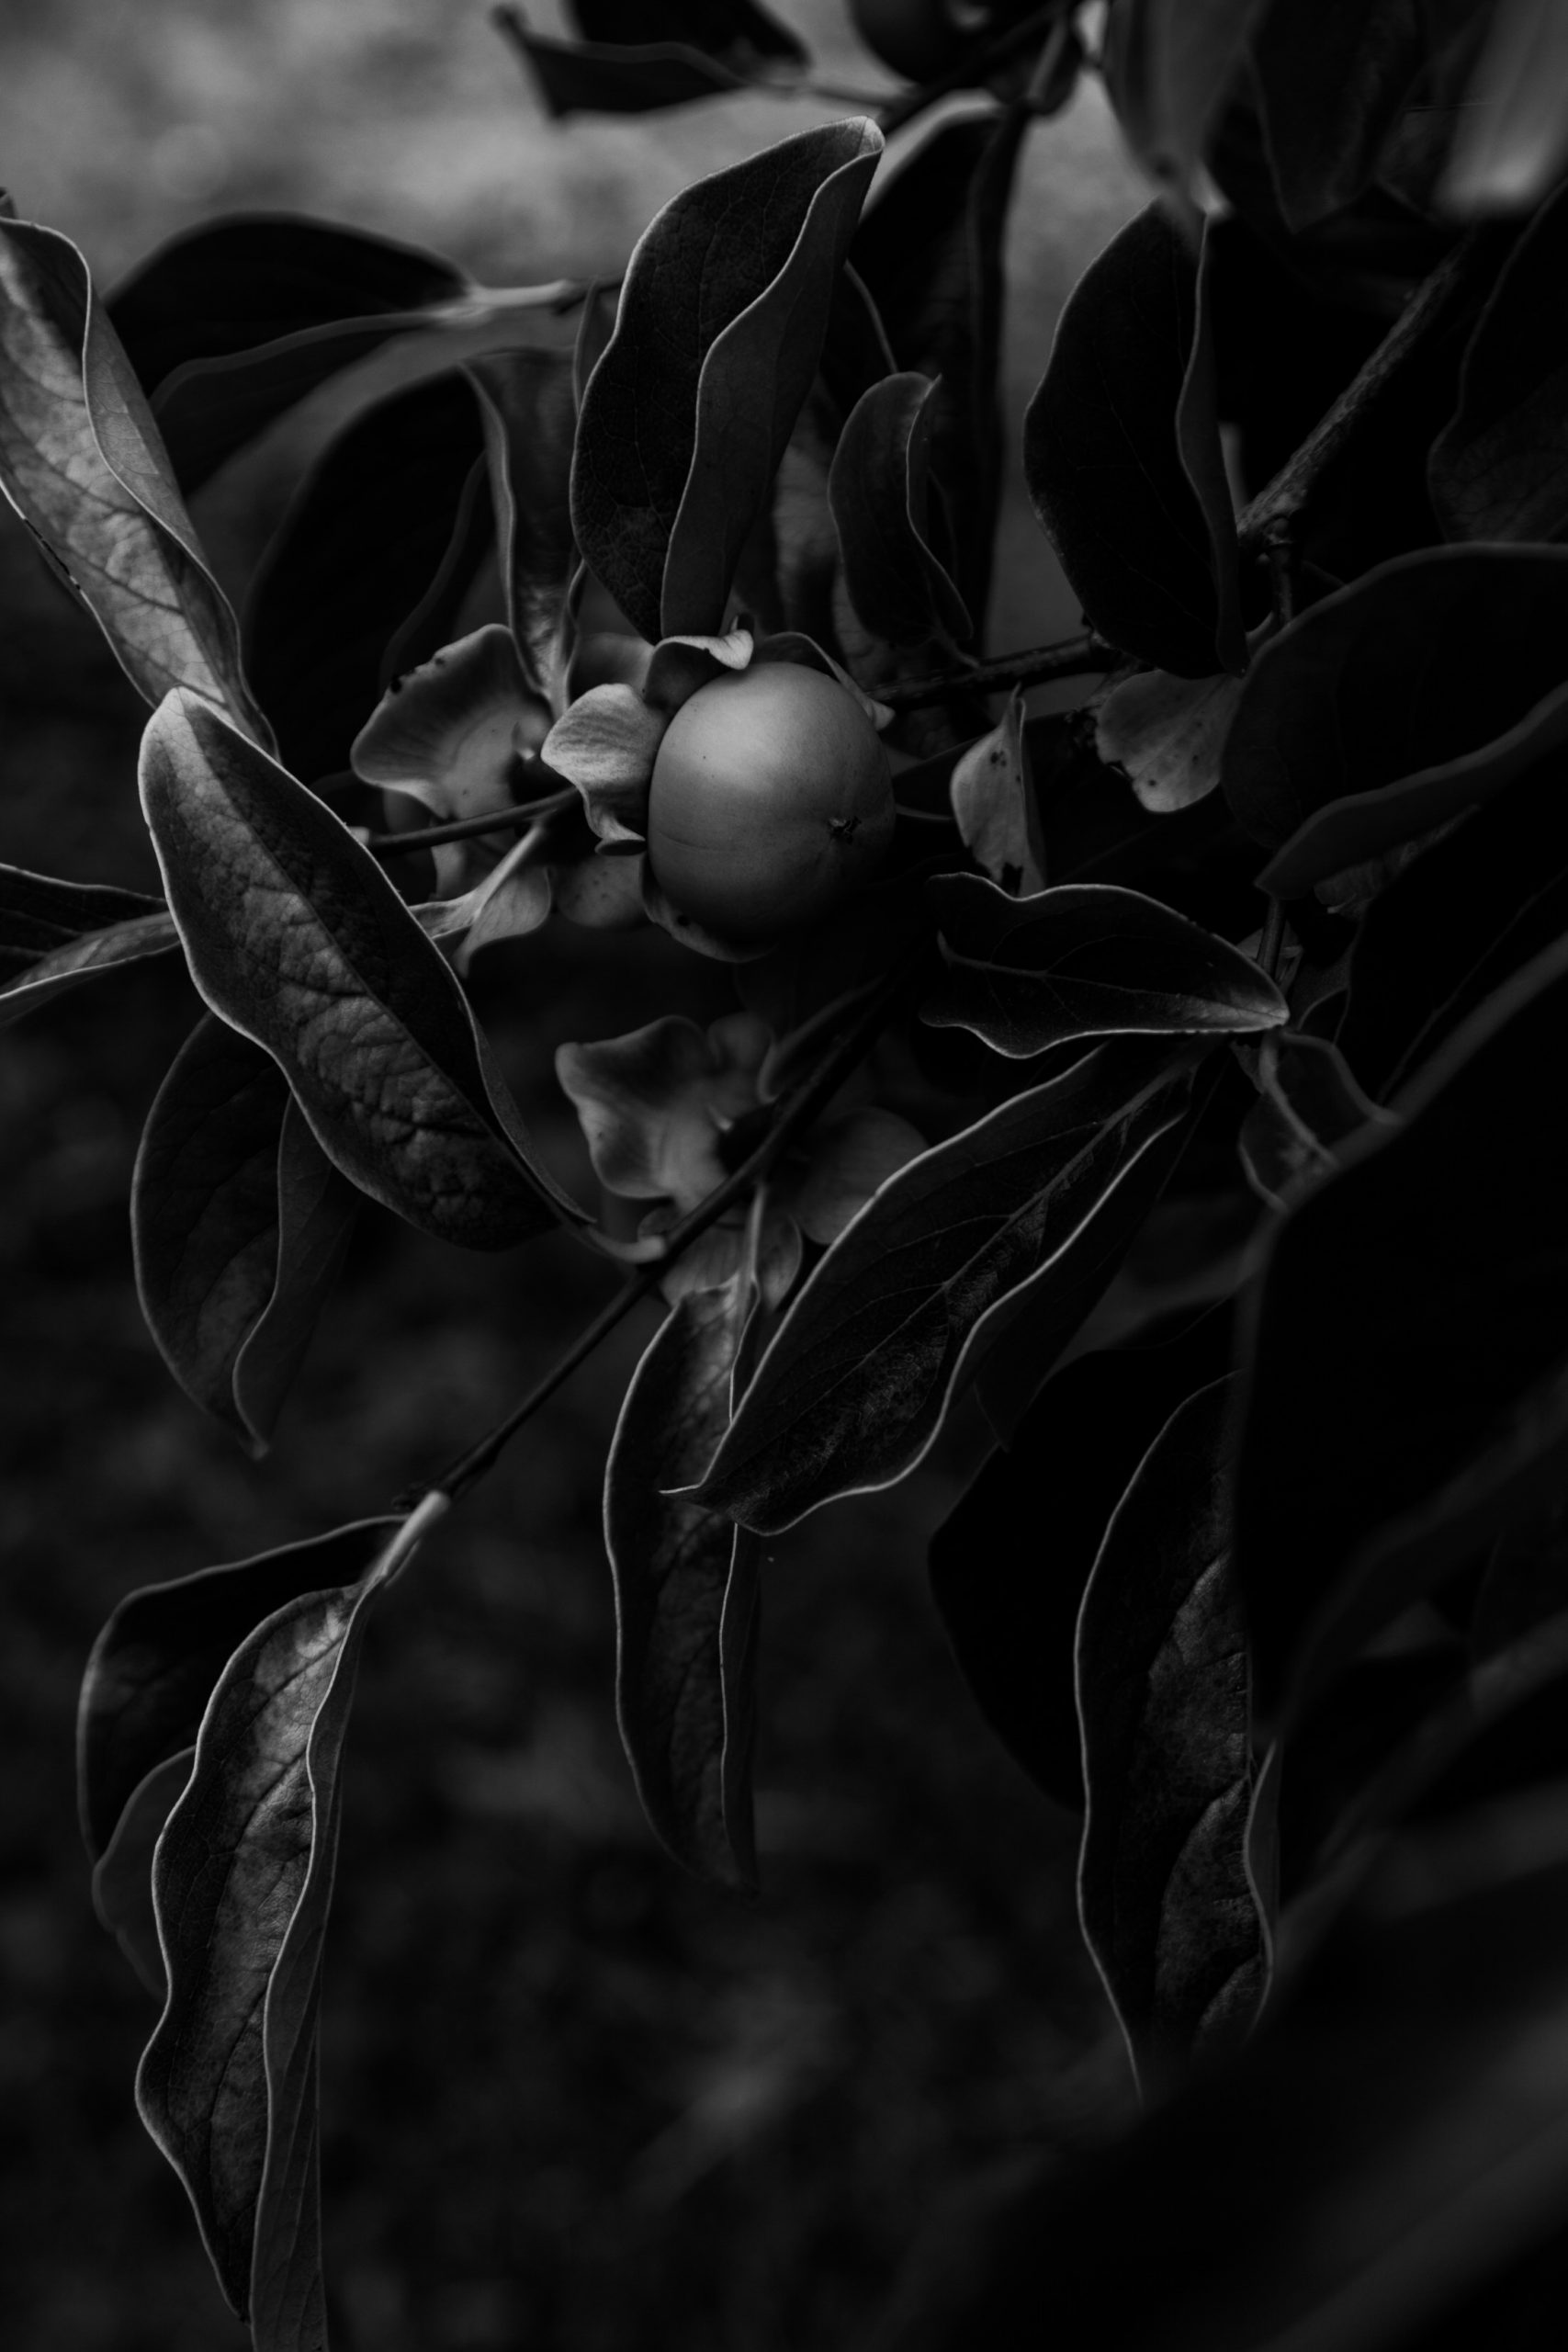 black and white image of a persimmon hanging in a tree surrounded by leaves